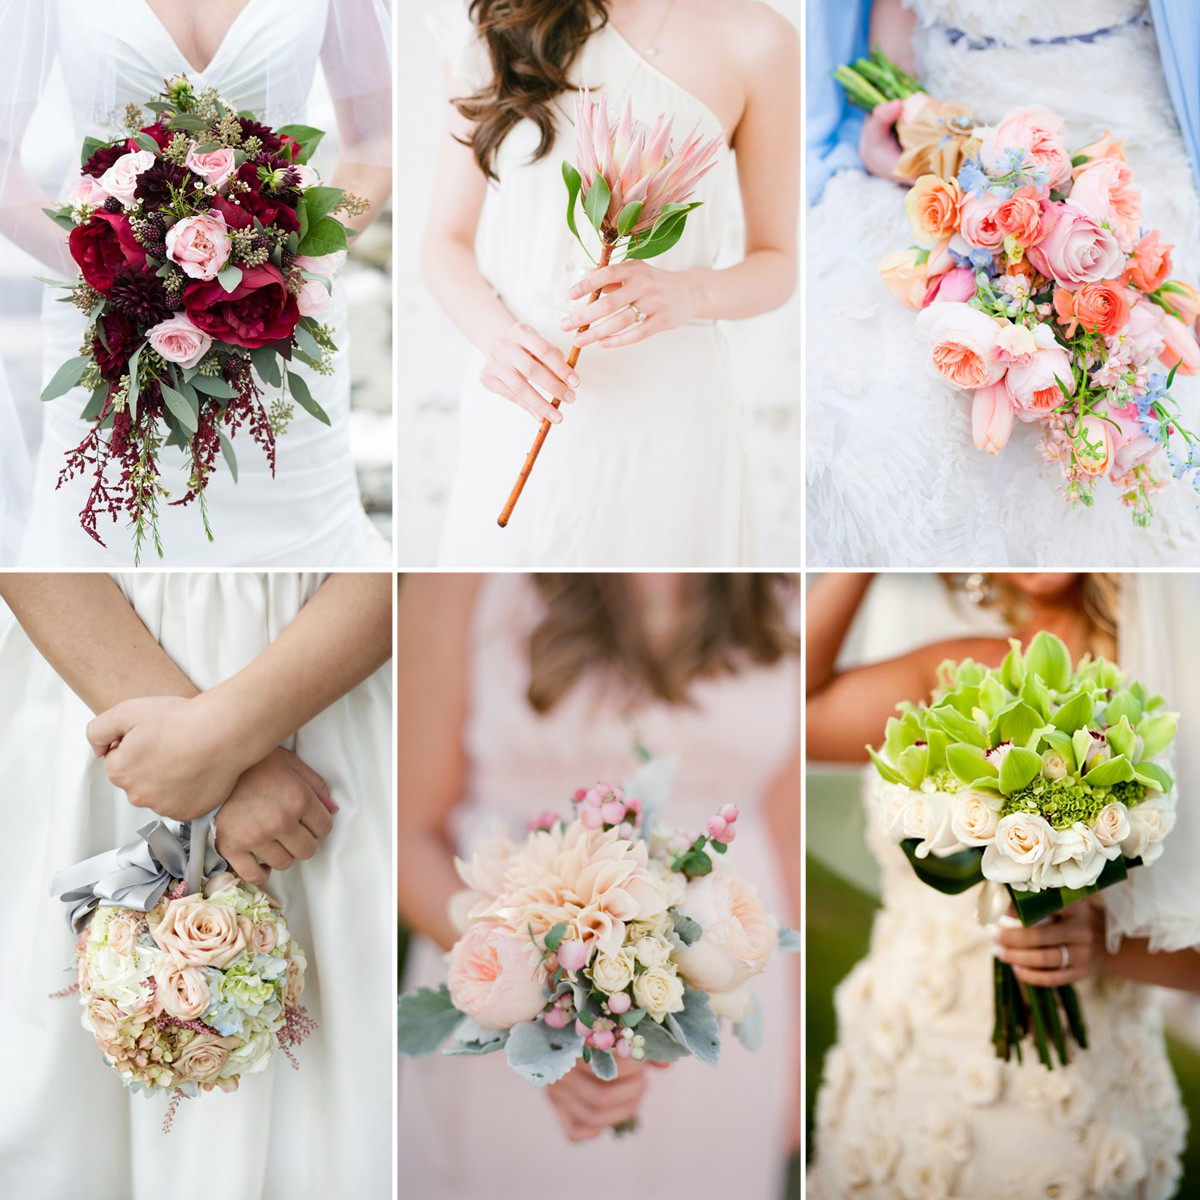 Types Of Flowers For Weddings
 12 Types of Wedding Bouquets